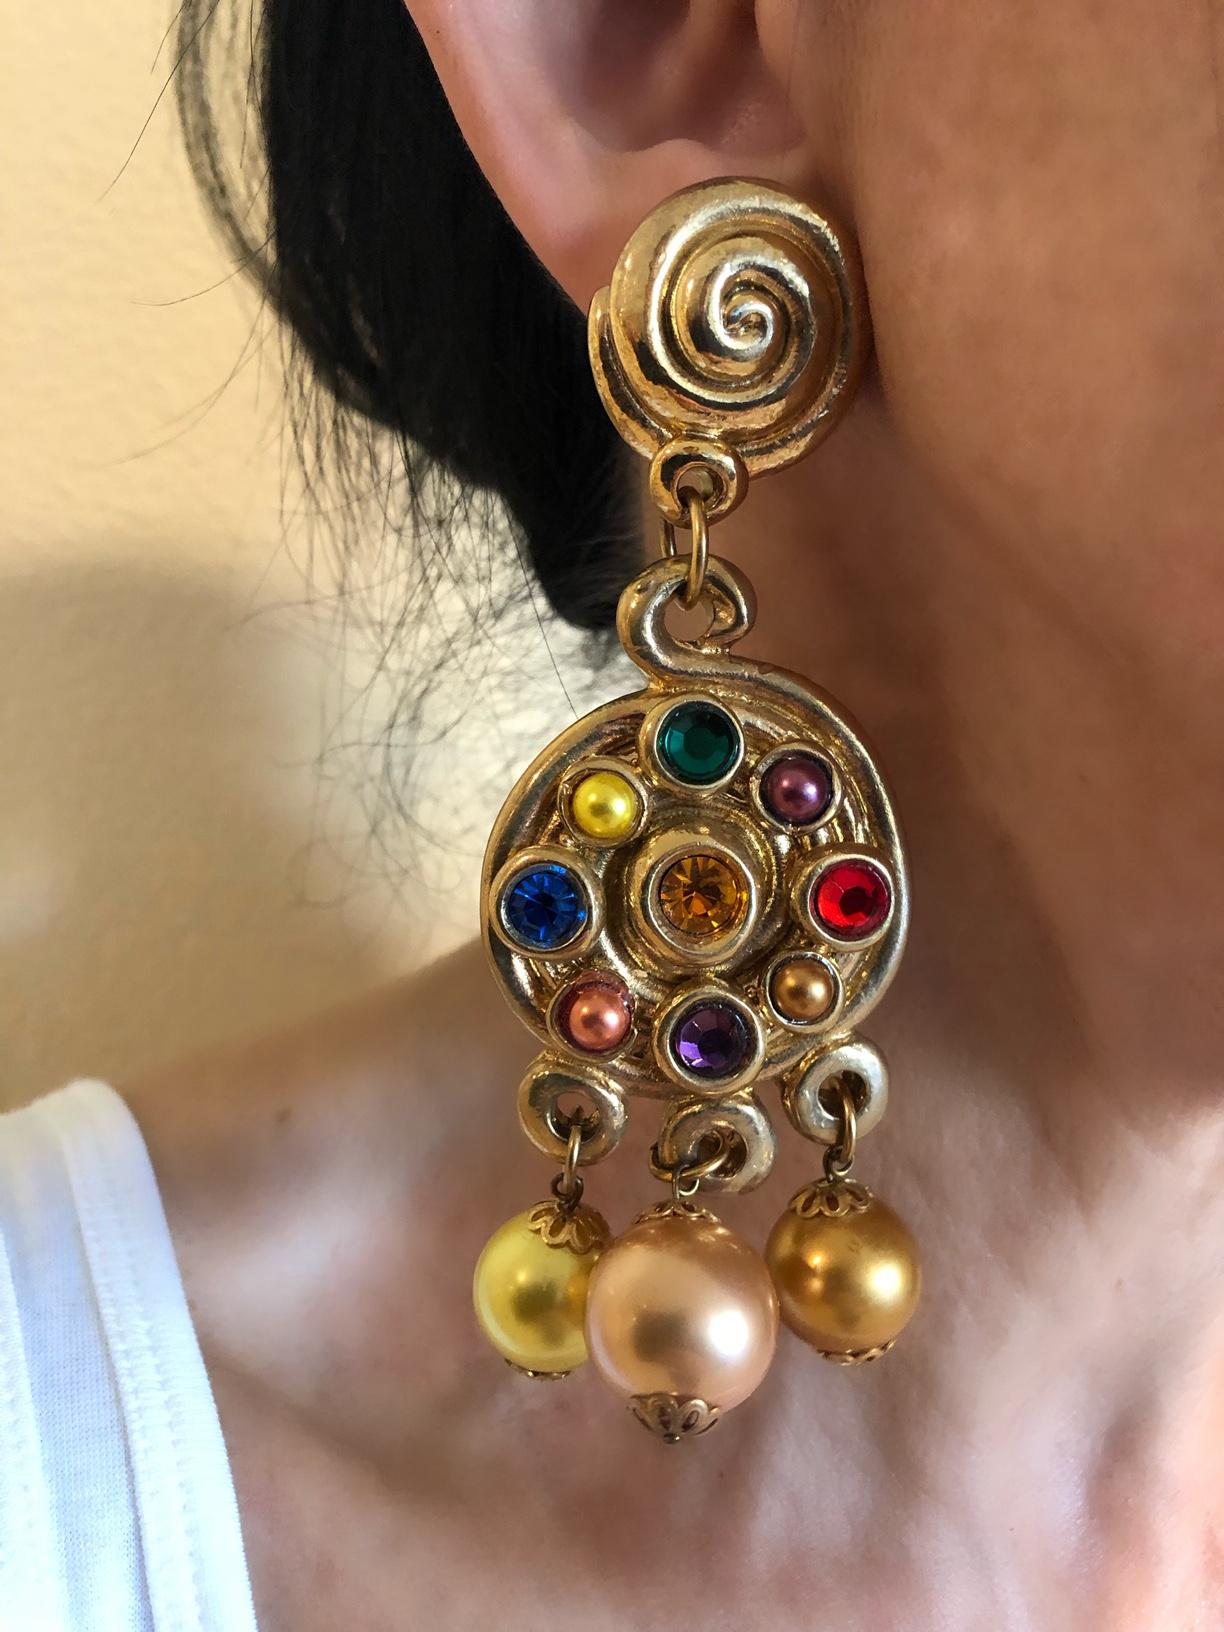  Unique Parisian statement earrings created by Jacky De G Paris. Comprised of a lightweight molded resin the earrings exude 1980's French high fashion design - intricately molded in an avant garde manner which is enhanced by the hand-applied colored